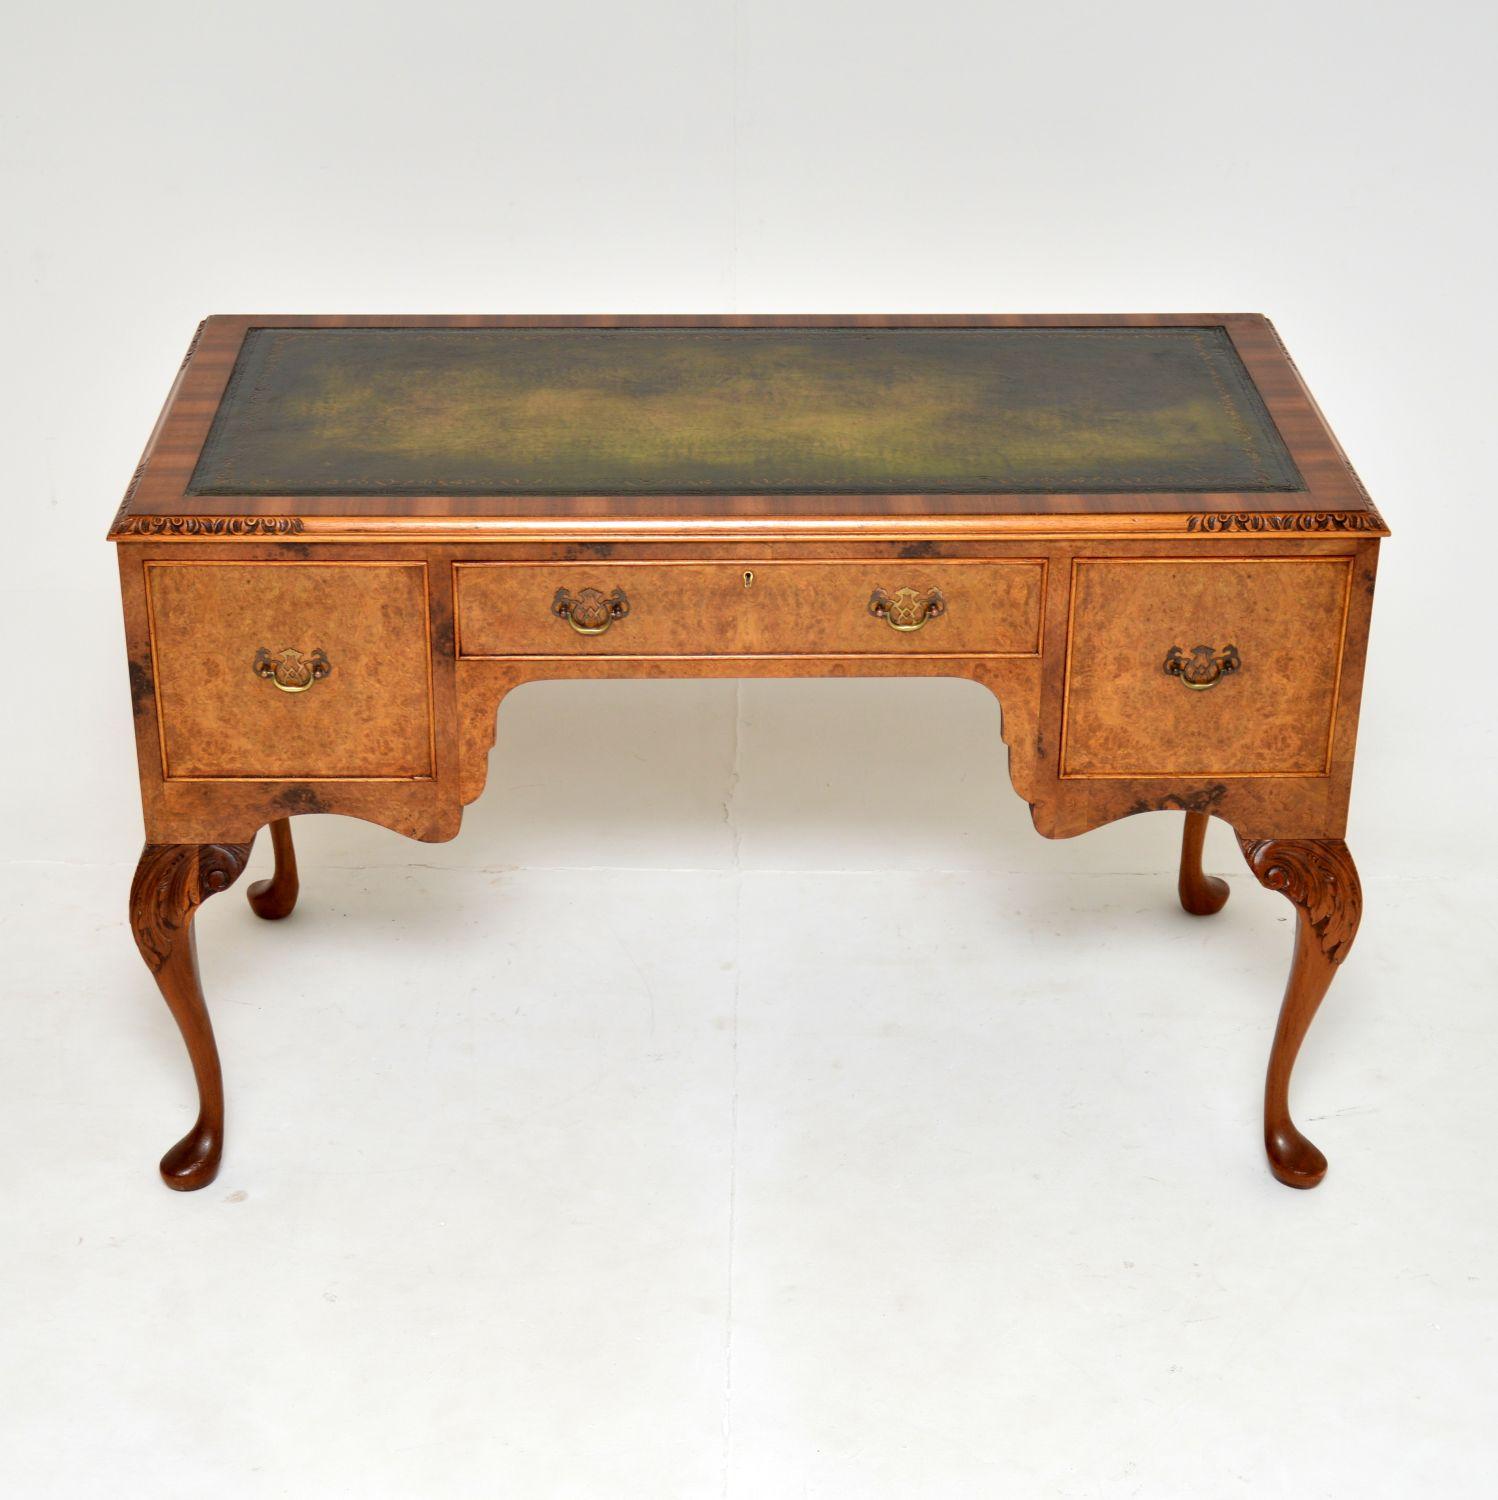 A beautiful antique burr walnut desk on legs. This was made in England, it dates from around the 1920-1930’s period.

It is of extremely fine quality and is a useful size. There are stunning burr walnut grain patterns, the top is cross banded and